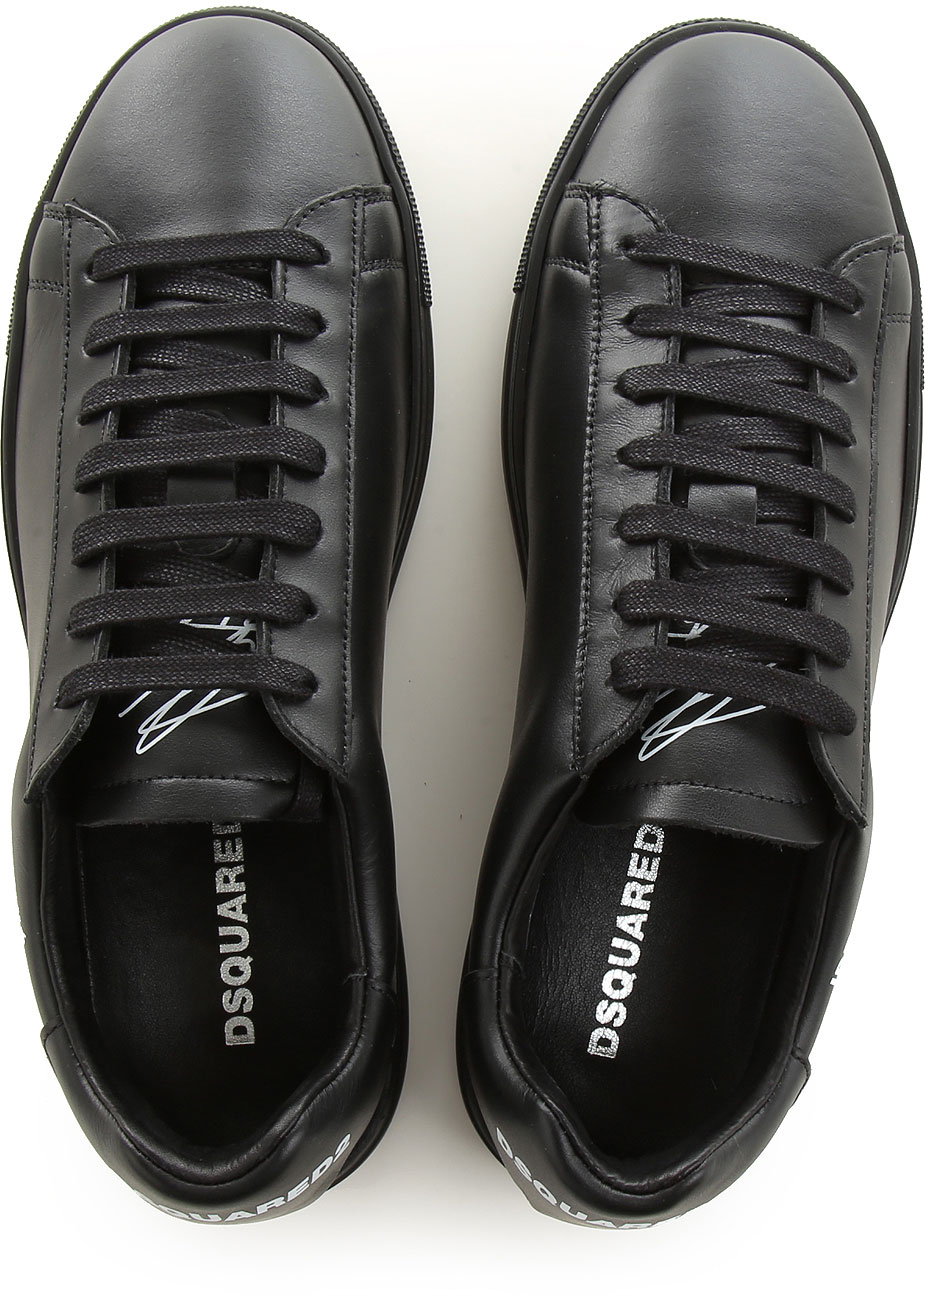 Mens Shoes Dsquared2, Style code: snm0005-01504180-m063